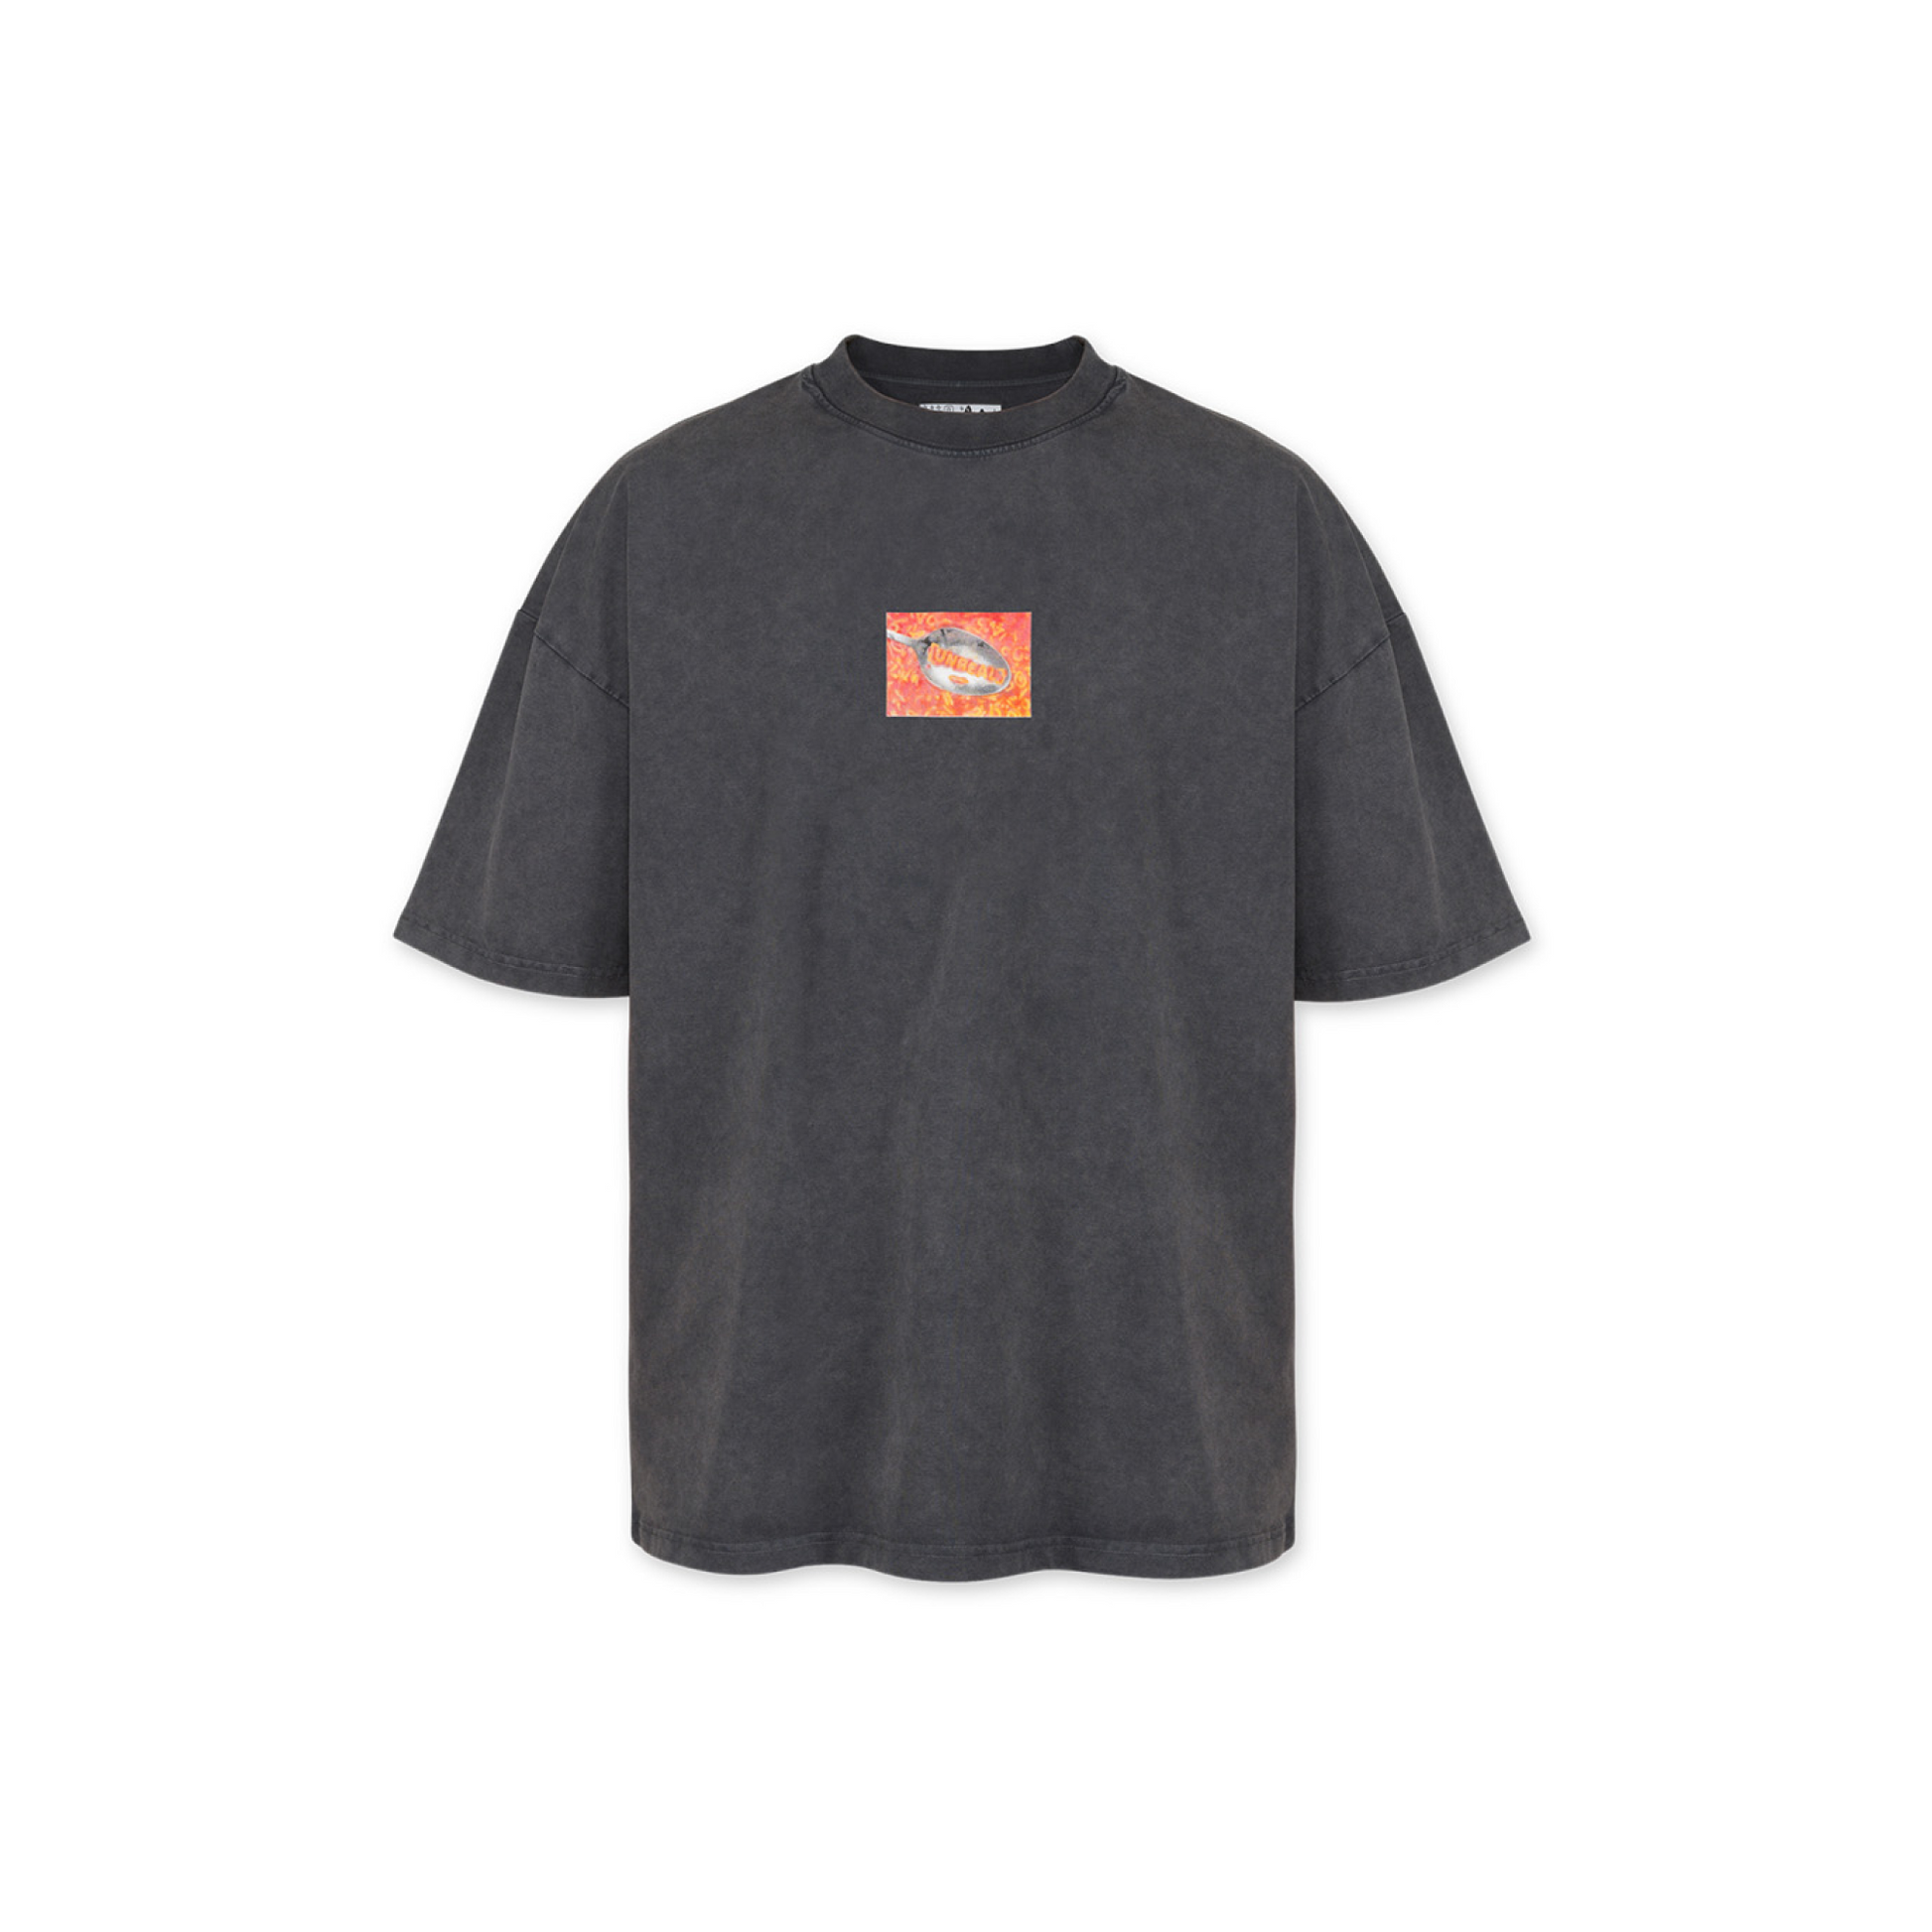 Unreal Soup Tee Stone Washed Black UNREAL